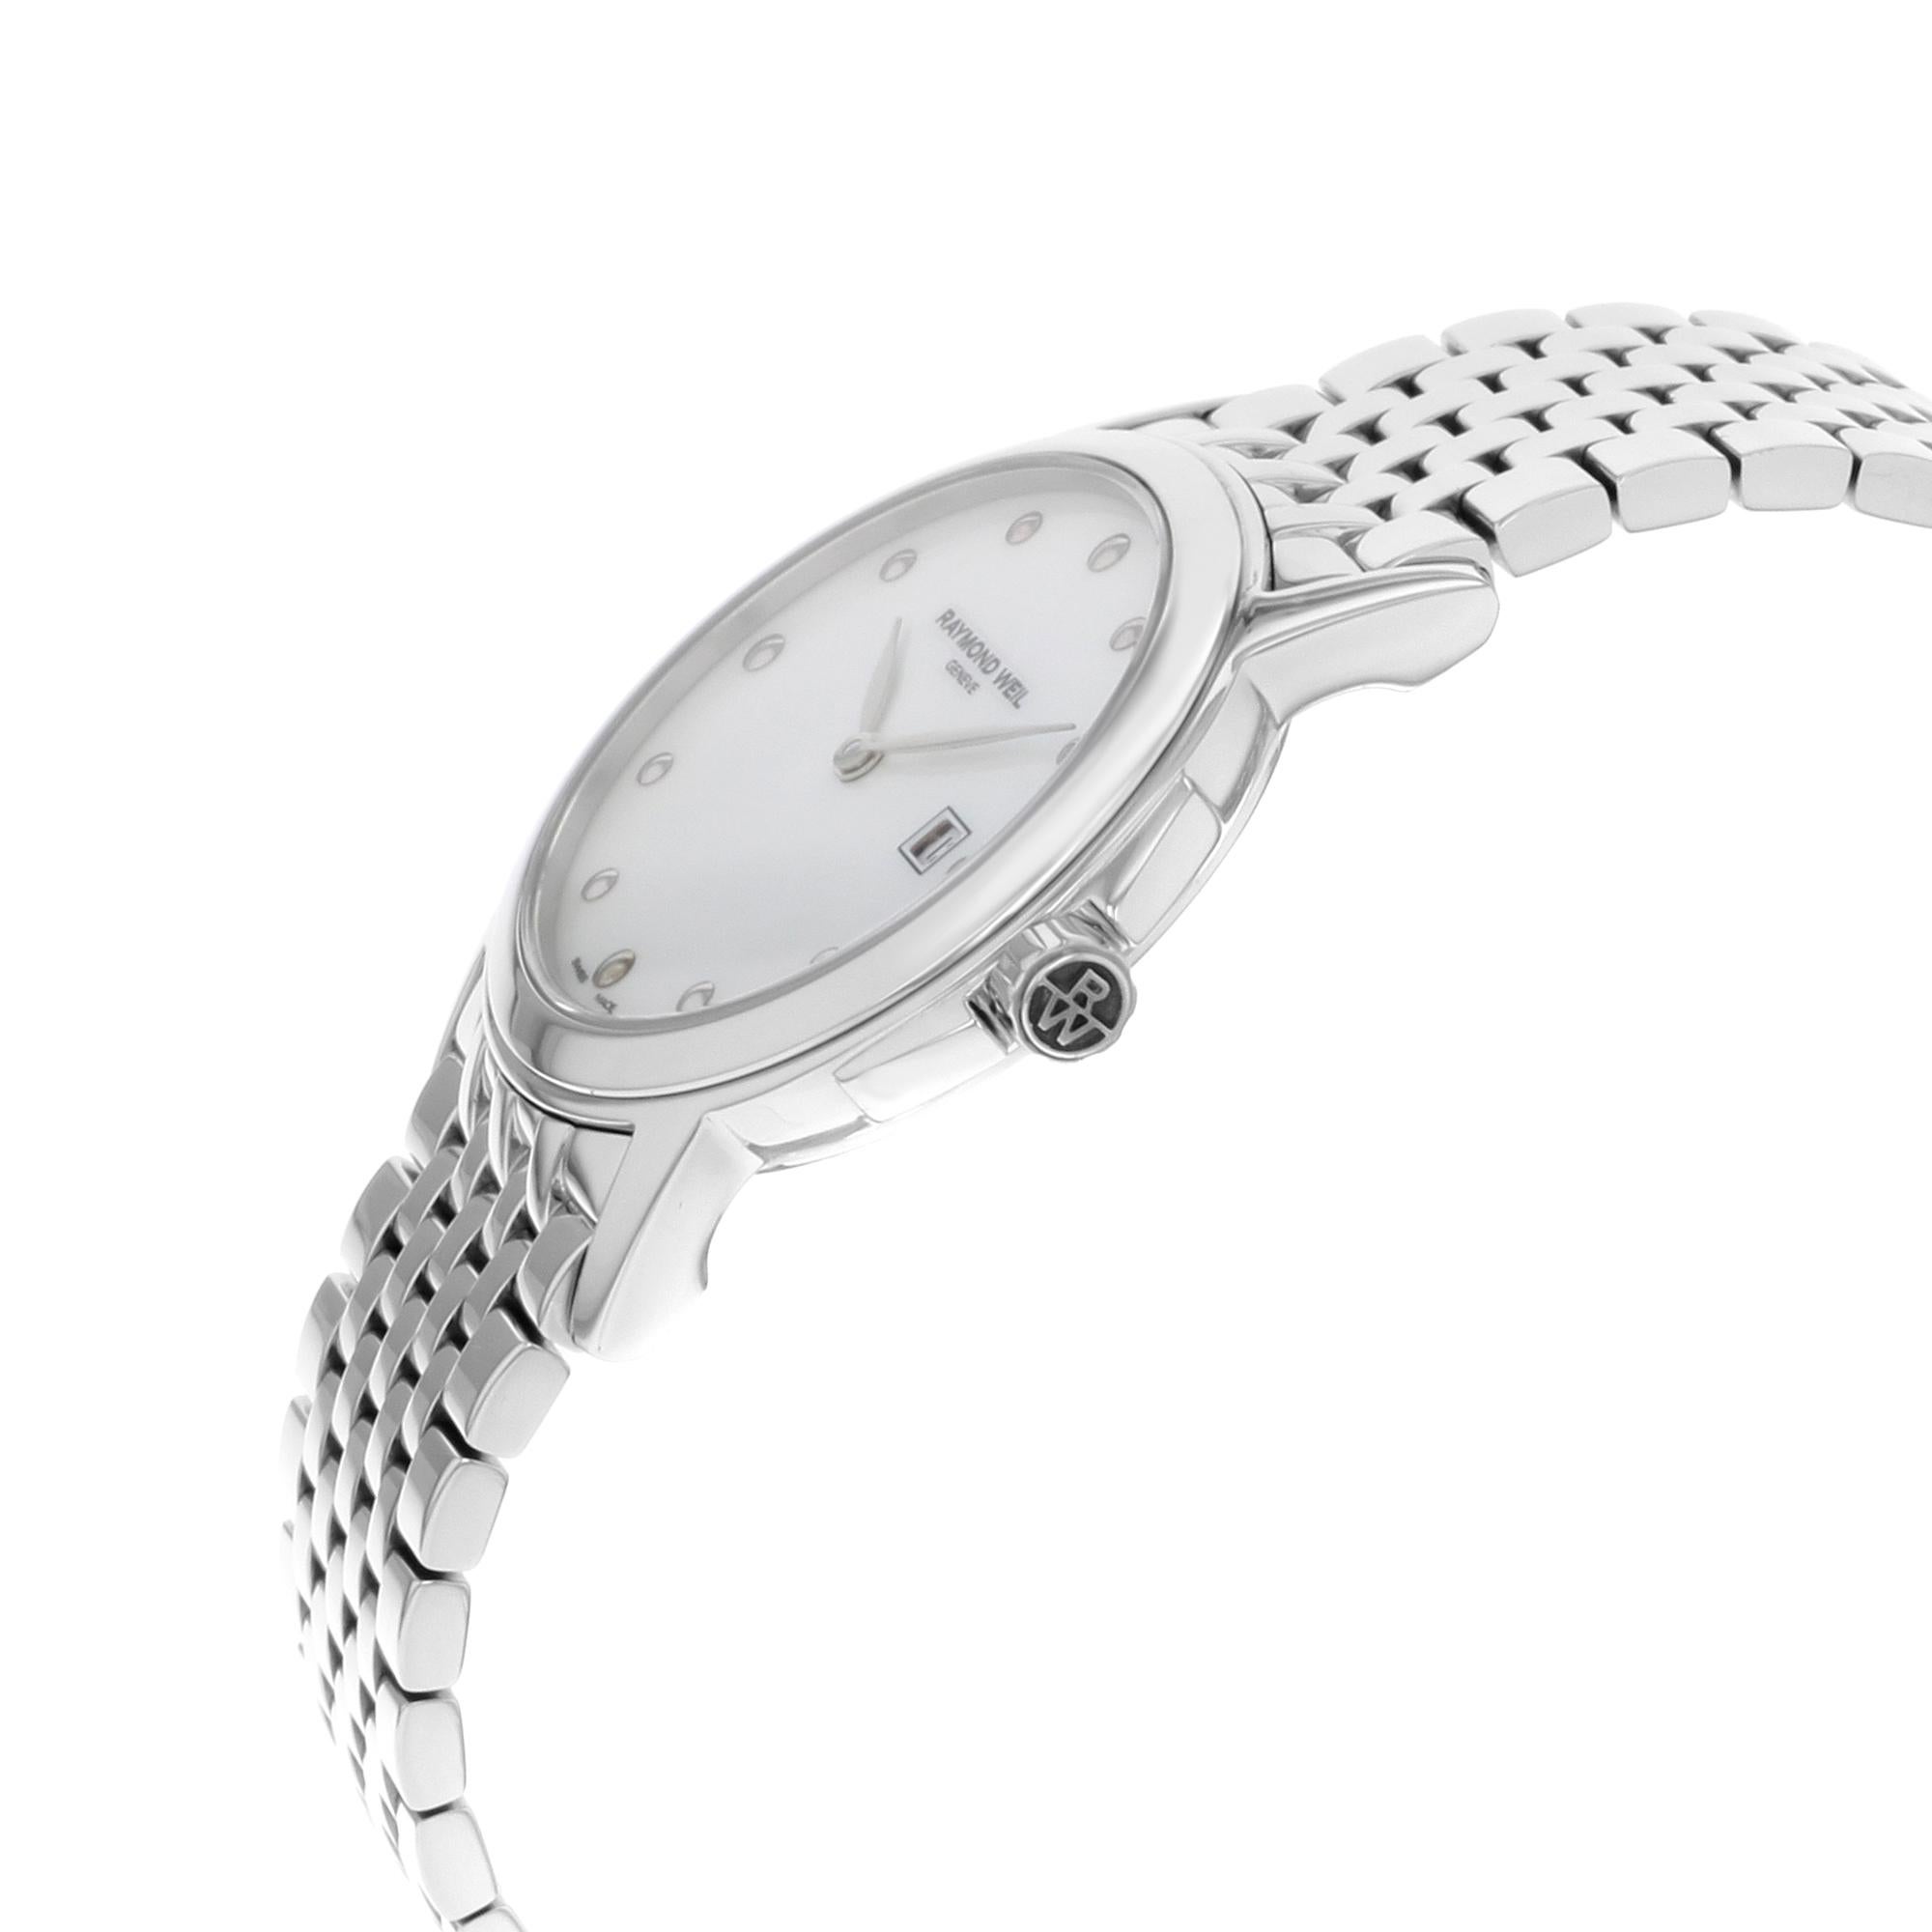 This display model Raymond Weil Tradition 5966-ST-97001 is a beautiful Ladies timepiece that is powered by a quartz movement which is cased in a stainless steel case. It has a round shape face, date dial and has hand dots style markers. It is